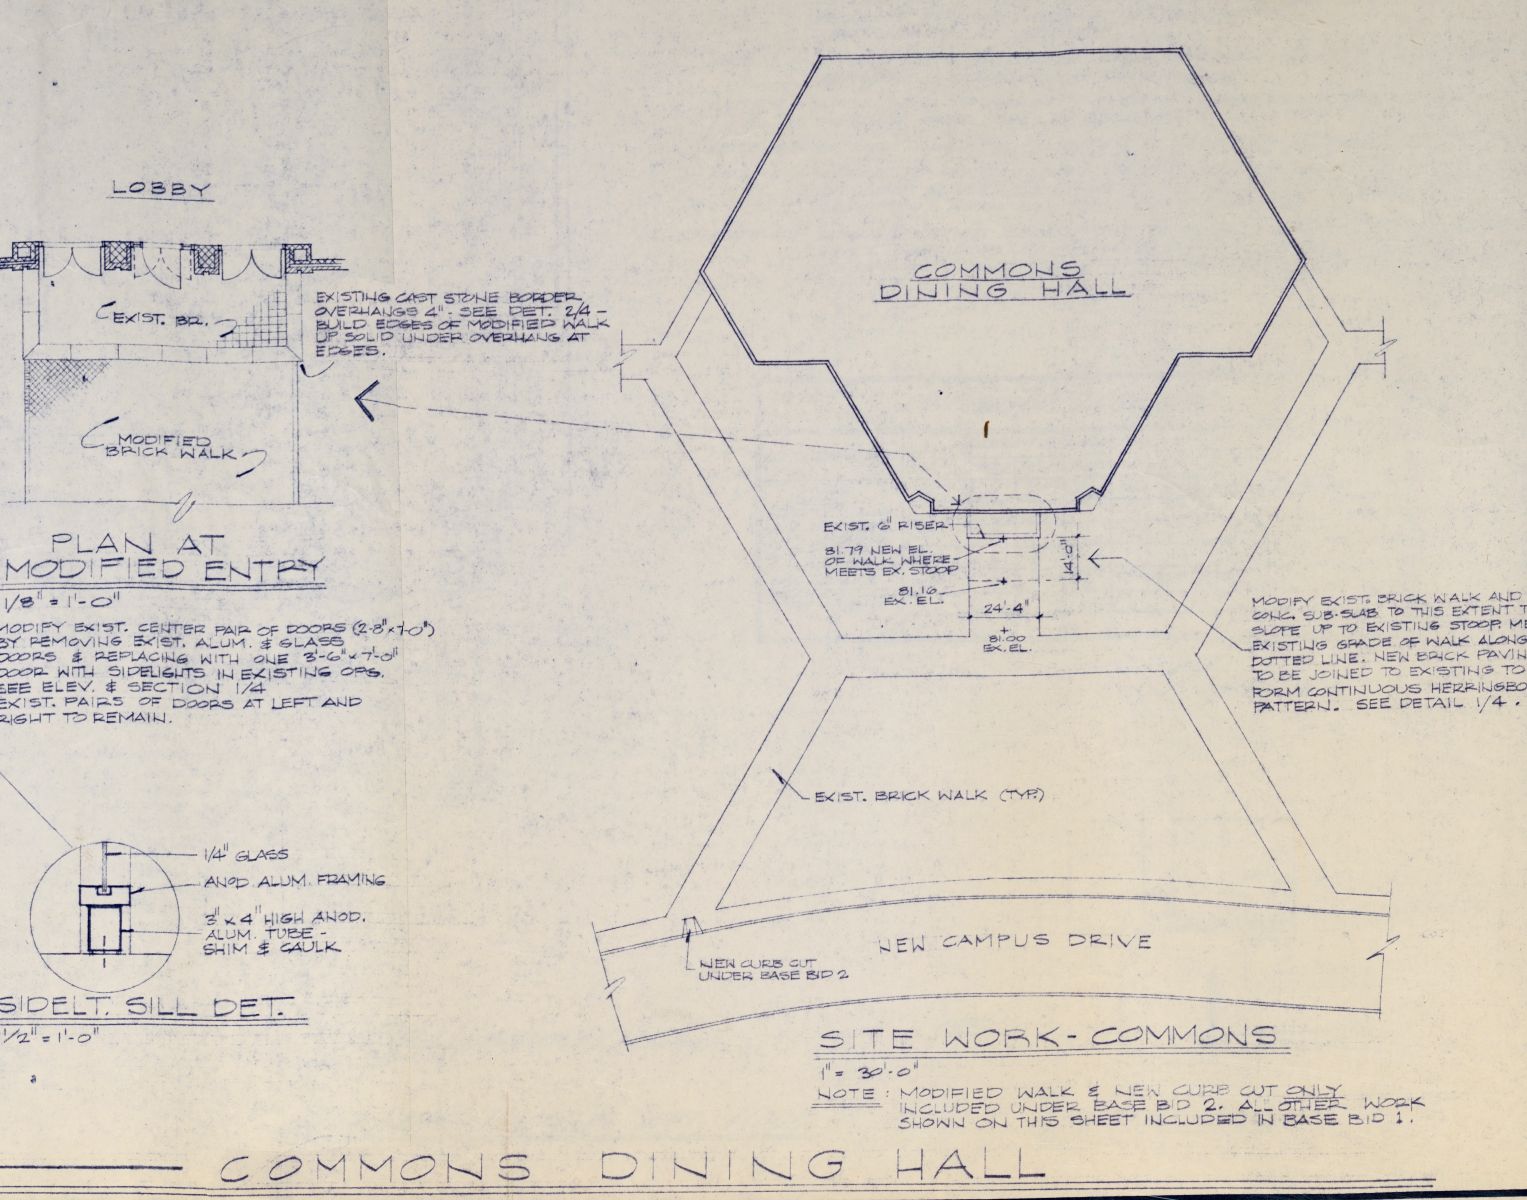 Sketch (1979) in blue ink of planned renovations to the Commons Dining Hall to meet physical accessibility considerations. 